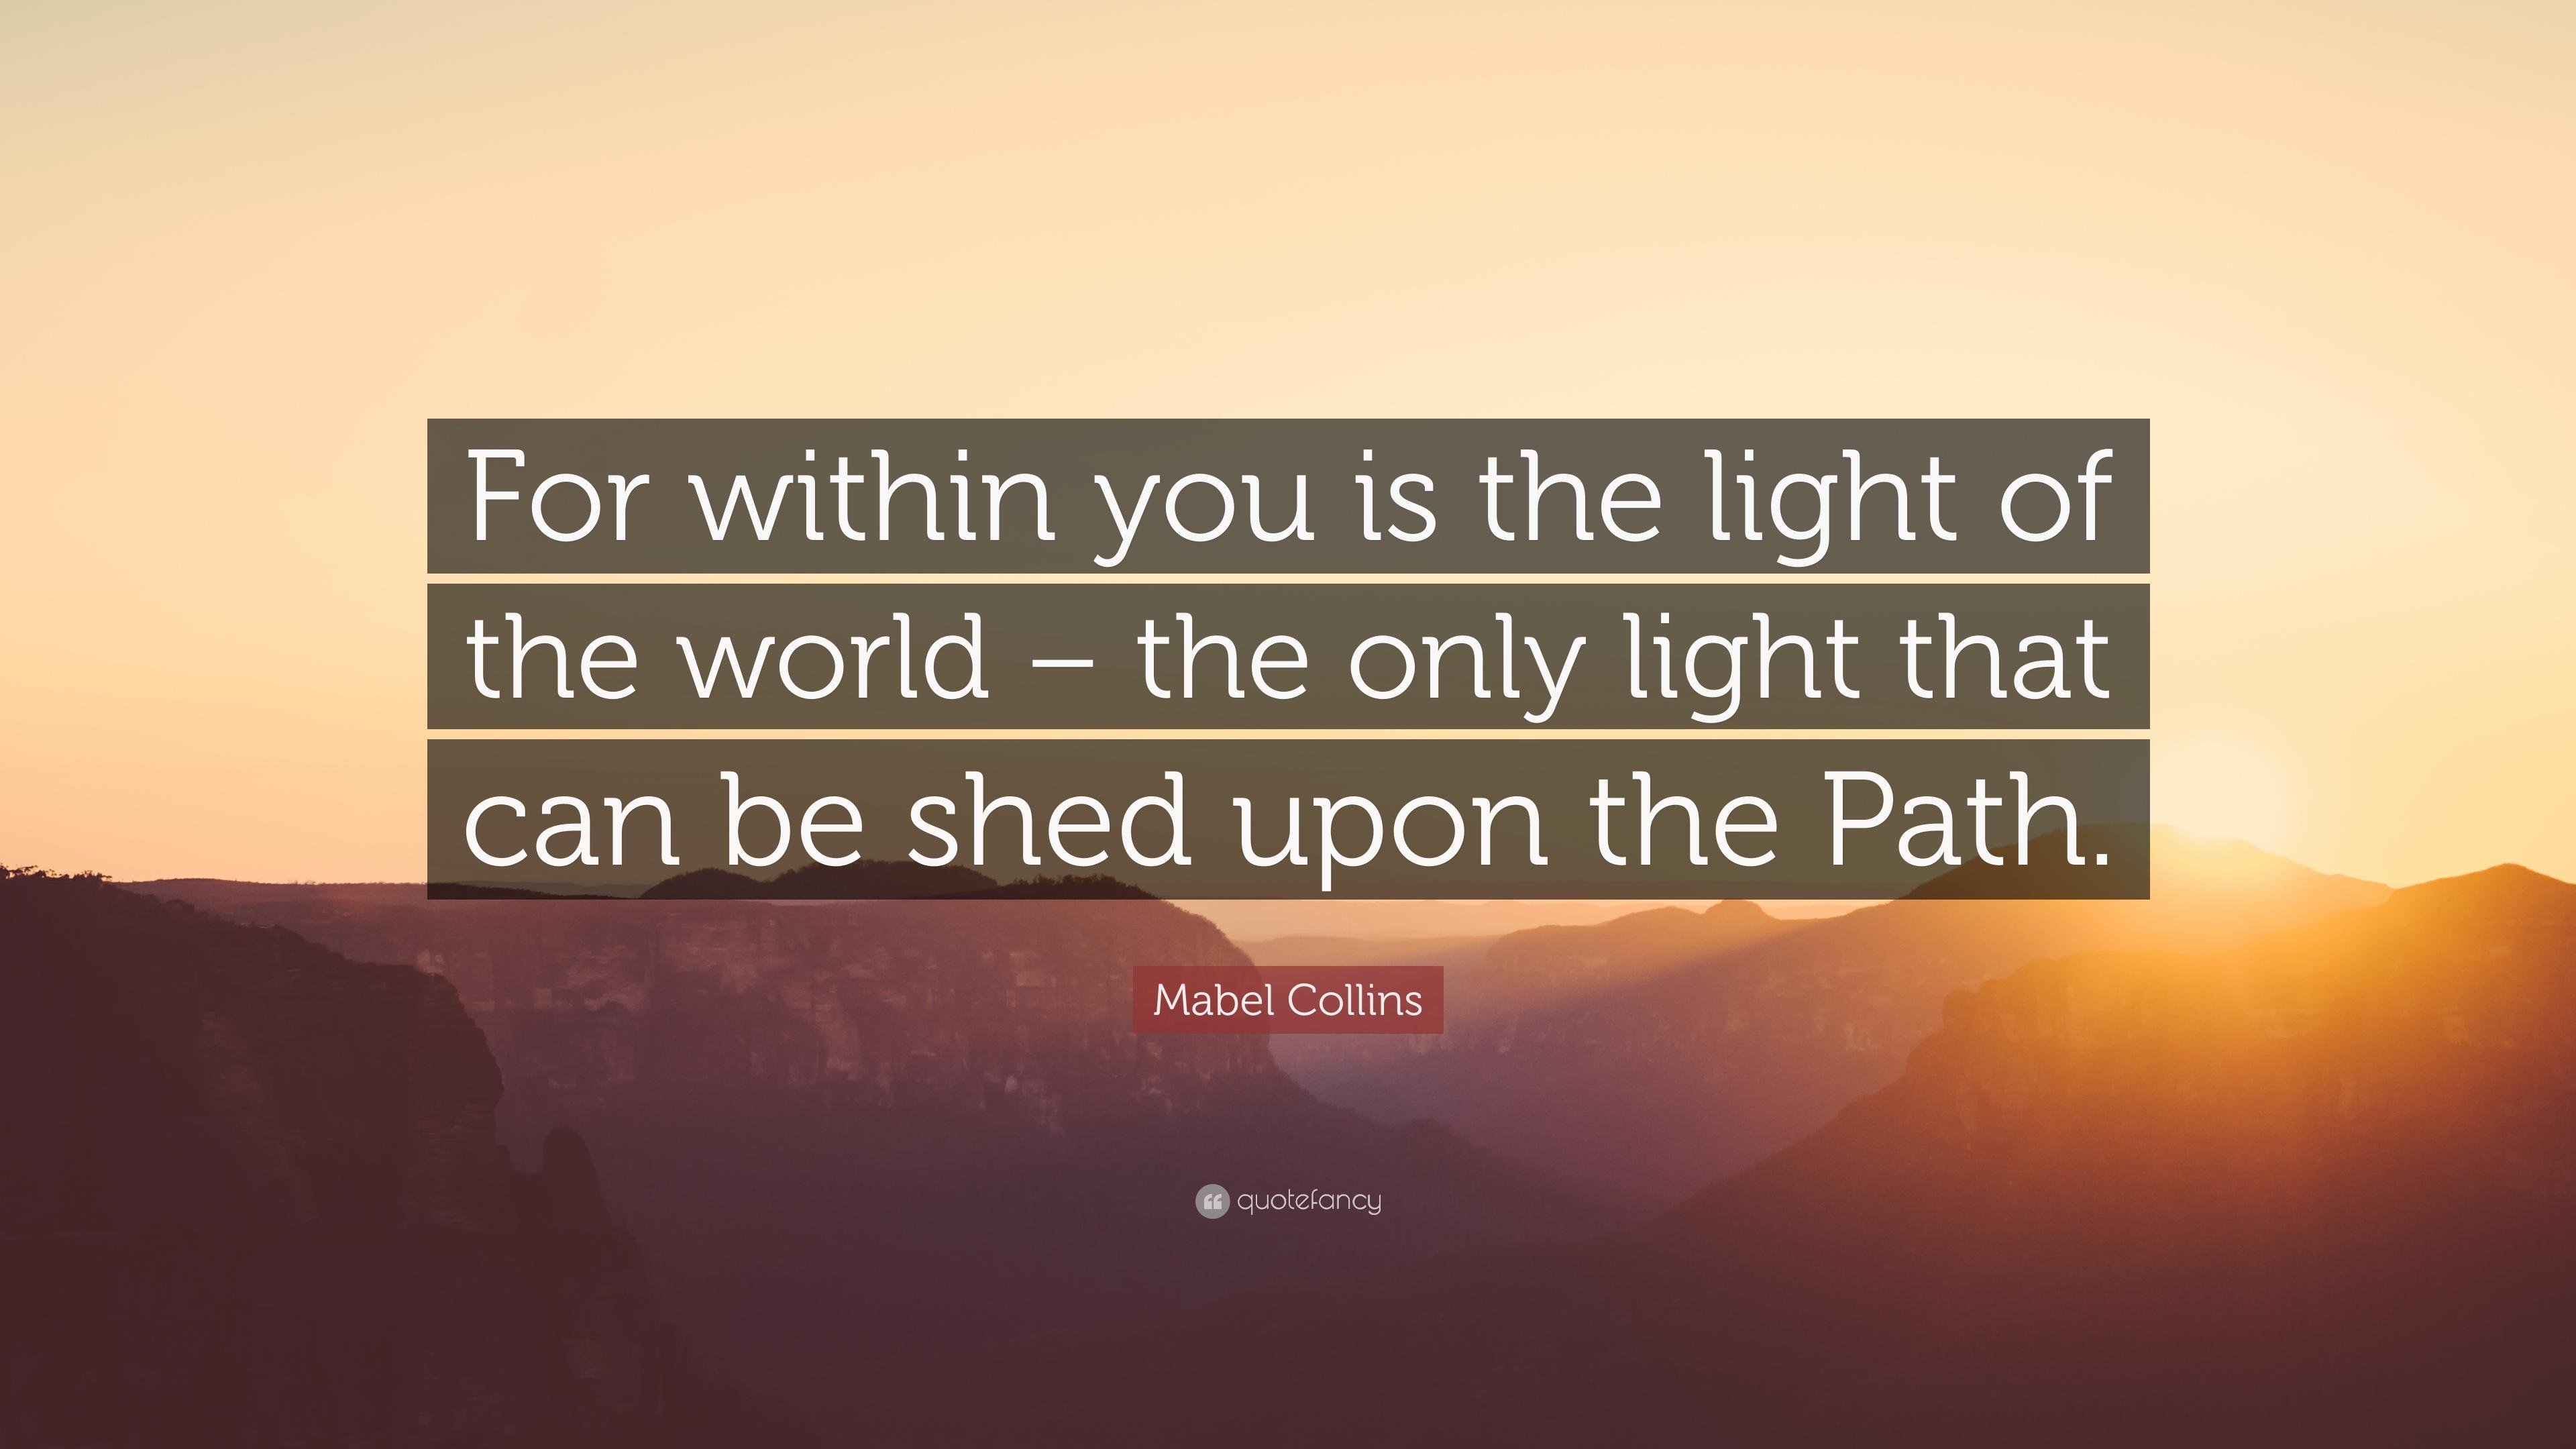 Mabel Collins Quote: “For within you is the light of the world